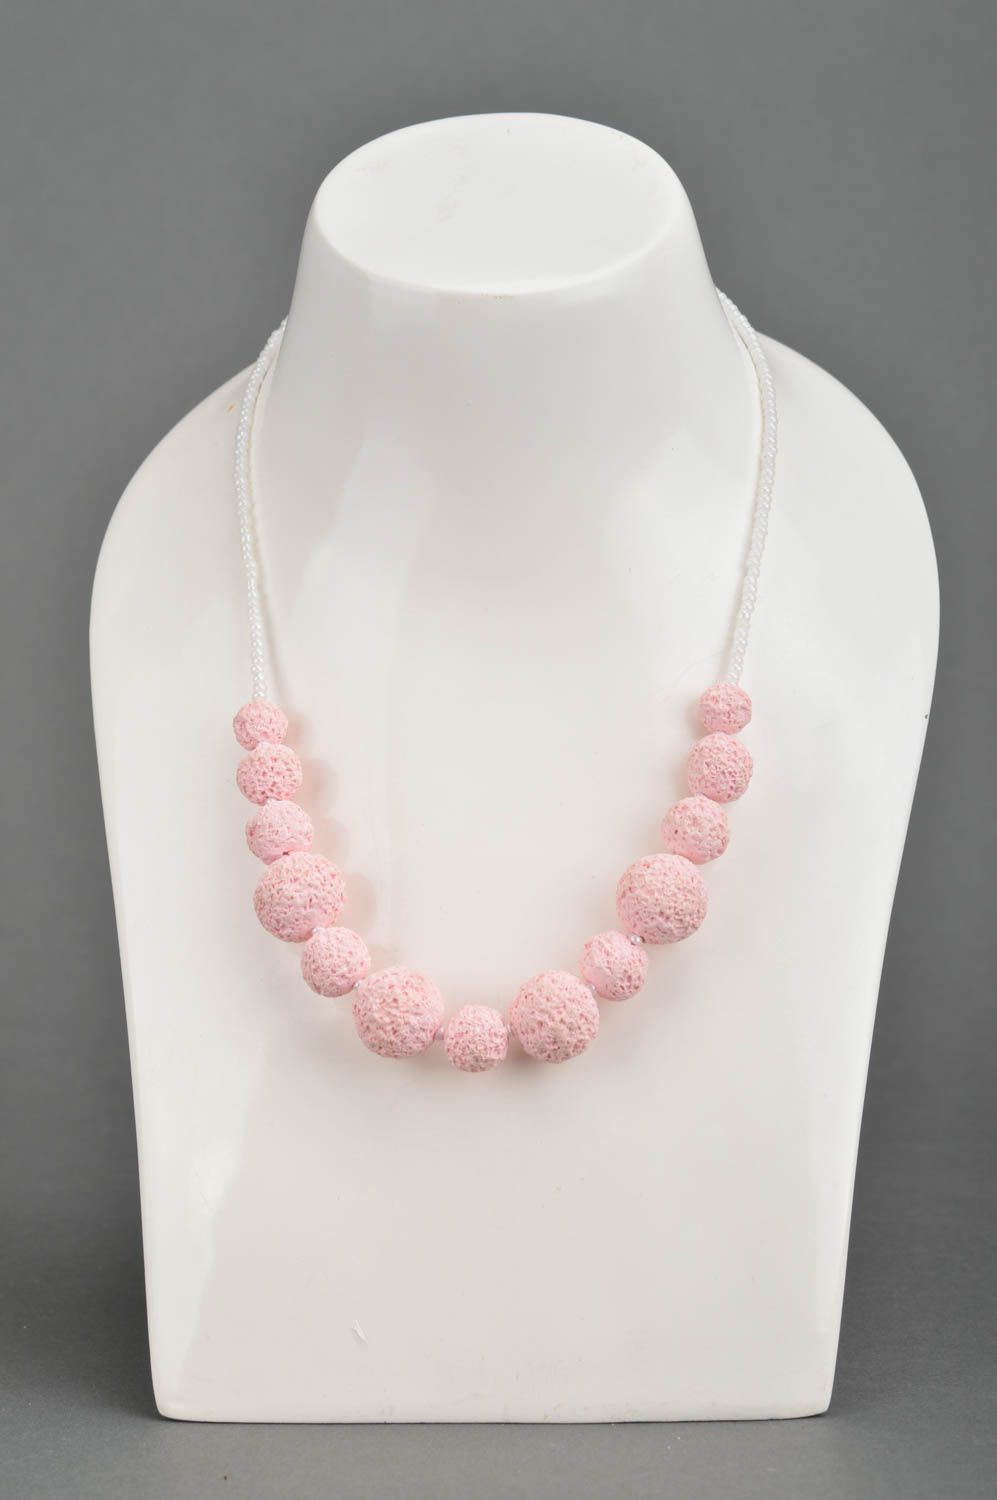 Handmade necklace made of polymer clay beautiful pink designer accessory photo 1